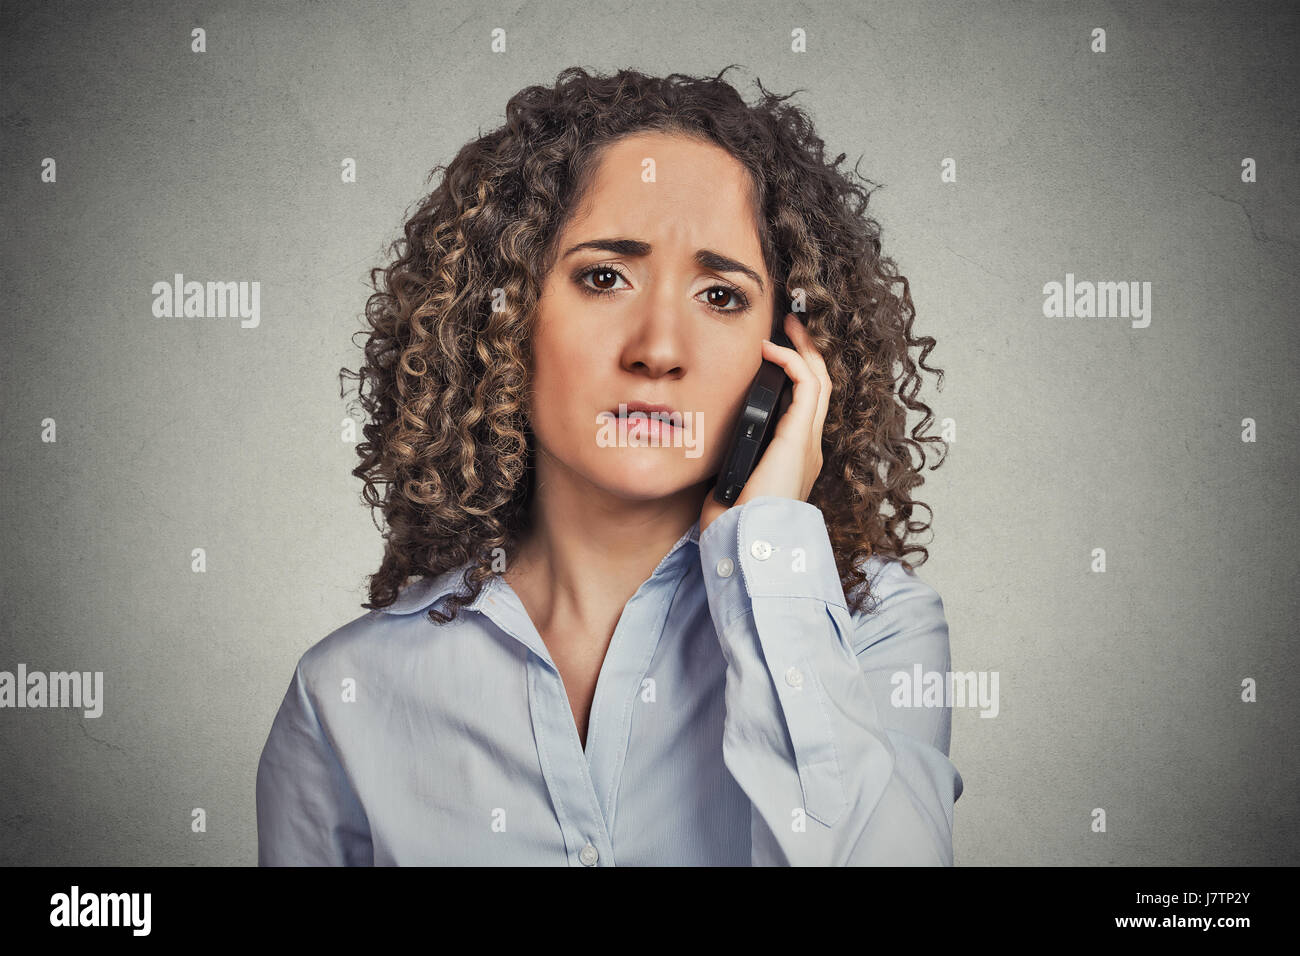 Sad young woman talking on mobile phone Banque D'Images